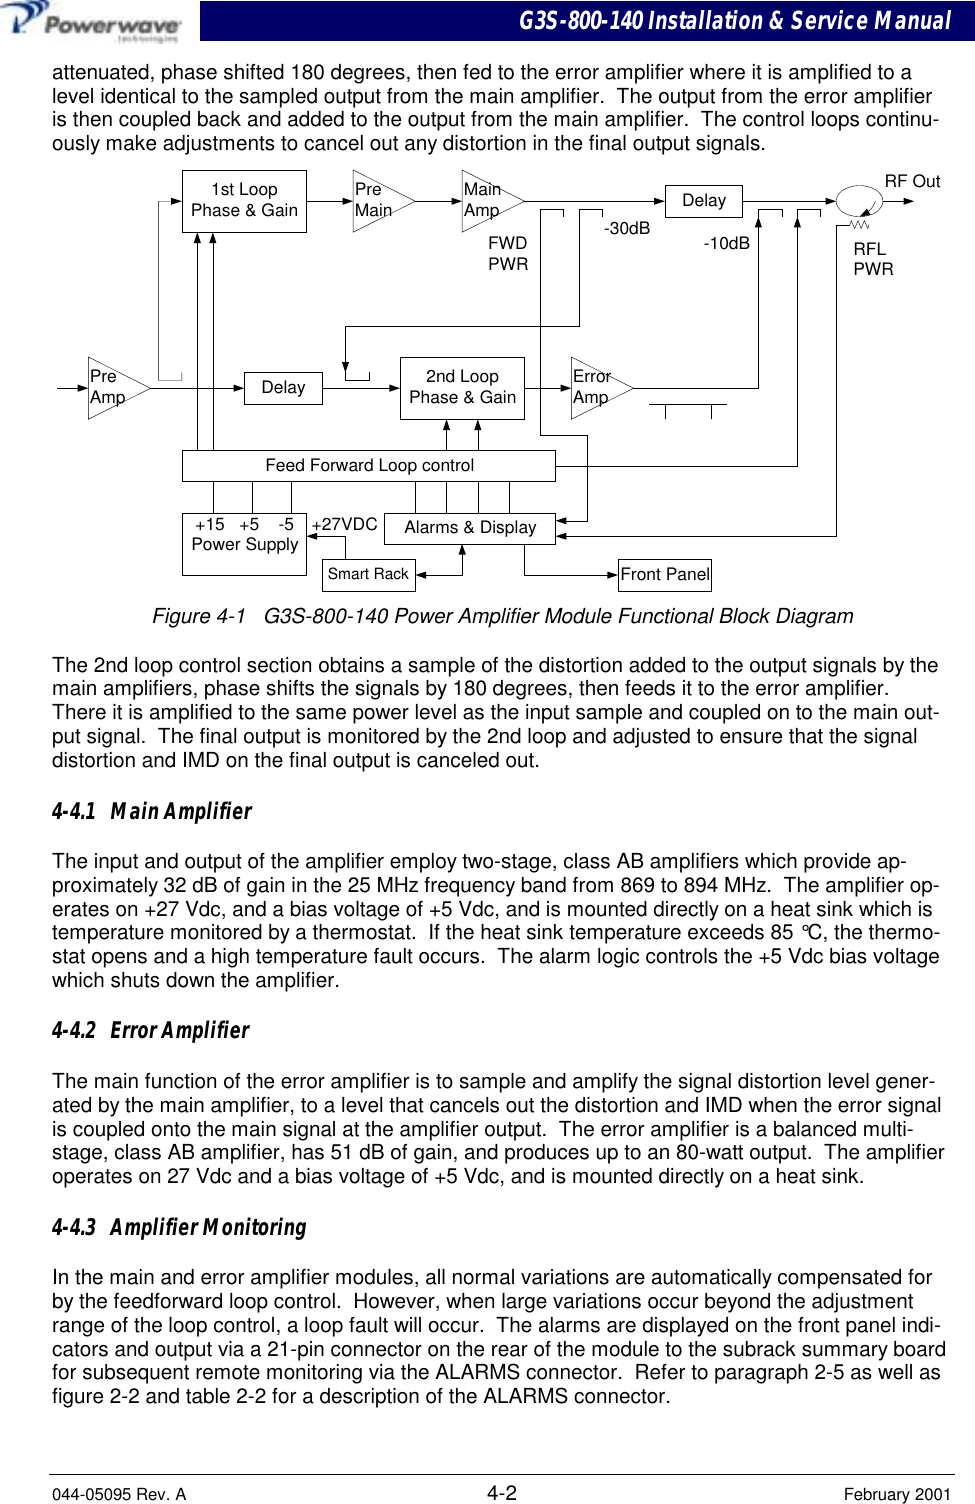 G3S-800-140 Installation &amp; Service Manual044-05095 Rev. A 4-2 February 2001attenuated, phase shifted 180 degrees, then fed to the error amplifier where it is amplified to alevel identical to the sampled output from the main amplifier.  The output from the error amplifieris then coupled back and added to the output from the main amplifier.  The control loops continu-ously make adjustments to cancel out any distortion in the final output signals.PreAmpPreMain MainAmpErrorAmpDelayFeed Forward Loop control2nd LoopPhase &amp; Gain1st LoopPhase &amp; Gain DelayAlarms &amp; Display+15   +5    -5Power Supply-30dB -10dBRF OutRFLPWRFWDPWRFront PanelSmart Rack+27VDCFigure 4-1   G3S-800-140 Power Amplifier Module Functional Block DiagramThe 2nd loop control section obtains a sample of the distortion added to the output signals by themain amplifiers, phase shifts the signals by 180 degrees, then feeds it to the error amplifier.There it is amplified to the same power level as the input sample and coupled on to the main out-put signal.  The final output is monitored by the 2nd loop and adjusted to ensure that the signaldistortion and IMD on the final output is canceled out.4-4.1   Main AmplifierThe input and output of the amplifier employ two-stage, class AB amplifiers which provide ap-proximately 32 dB of gain in the 25 MHz frequency band from 869 to 894 MHz.  The amplifier op-erates on +27 Vdc, and a bias voltage of +5 Vdc, and is mounted directly on a heat sink which istemperature monitored by a thermostat.  If the heat sink temperature exceeds 85 °C, the thermo-stat opens and a high temperature fault occurs.  The alarm logic controls the +5 Vdc bias voltagewhich shuts down the amplifier.4-4.2   Error AmplifierThe main function of the error amplifier is to sample and amplify the signal distortion level gener-ated by the main amplifier, to a level that cancels out the distortion and IMD when the error signalis coupled onto the main signal at the amplifier output.  The error amplifier is a balanced multi-stage, class AB amplifier, has 51 dB of gain, and produces up to an 80-watt output.  The amplifieroperates on 27 Vdc and a bias voltage of +5 Vdc, and is mounted directly on a heat sink.4-4.3   Amplifier MonitoringIn the main and error amplifier modules, all normal variations are automatically compensated forby the feedforward loop control.  However, when large variations occur beyond the adjustmentrange of the loop control, a loop fault will occur.  The alarms are displayed on the front panel indi-cators and output via a 21-pin connector on the rear of the module to the subrack summary boardfor subsequent remote monitoring via the ALARMS connector.  Refer to paragraph 2-5 as well asfigure 2-2 and table 2-2 for a description of the ALARMS connector.